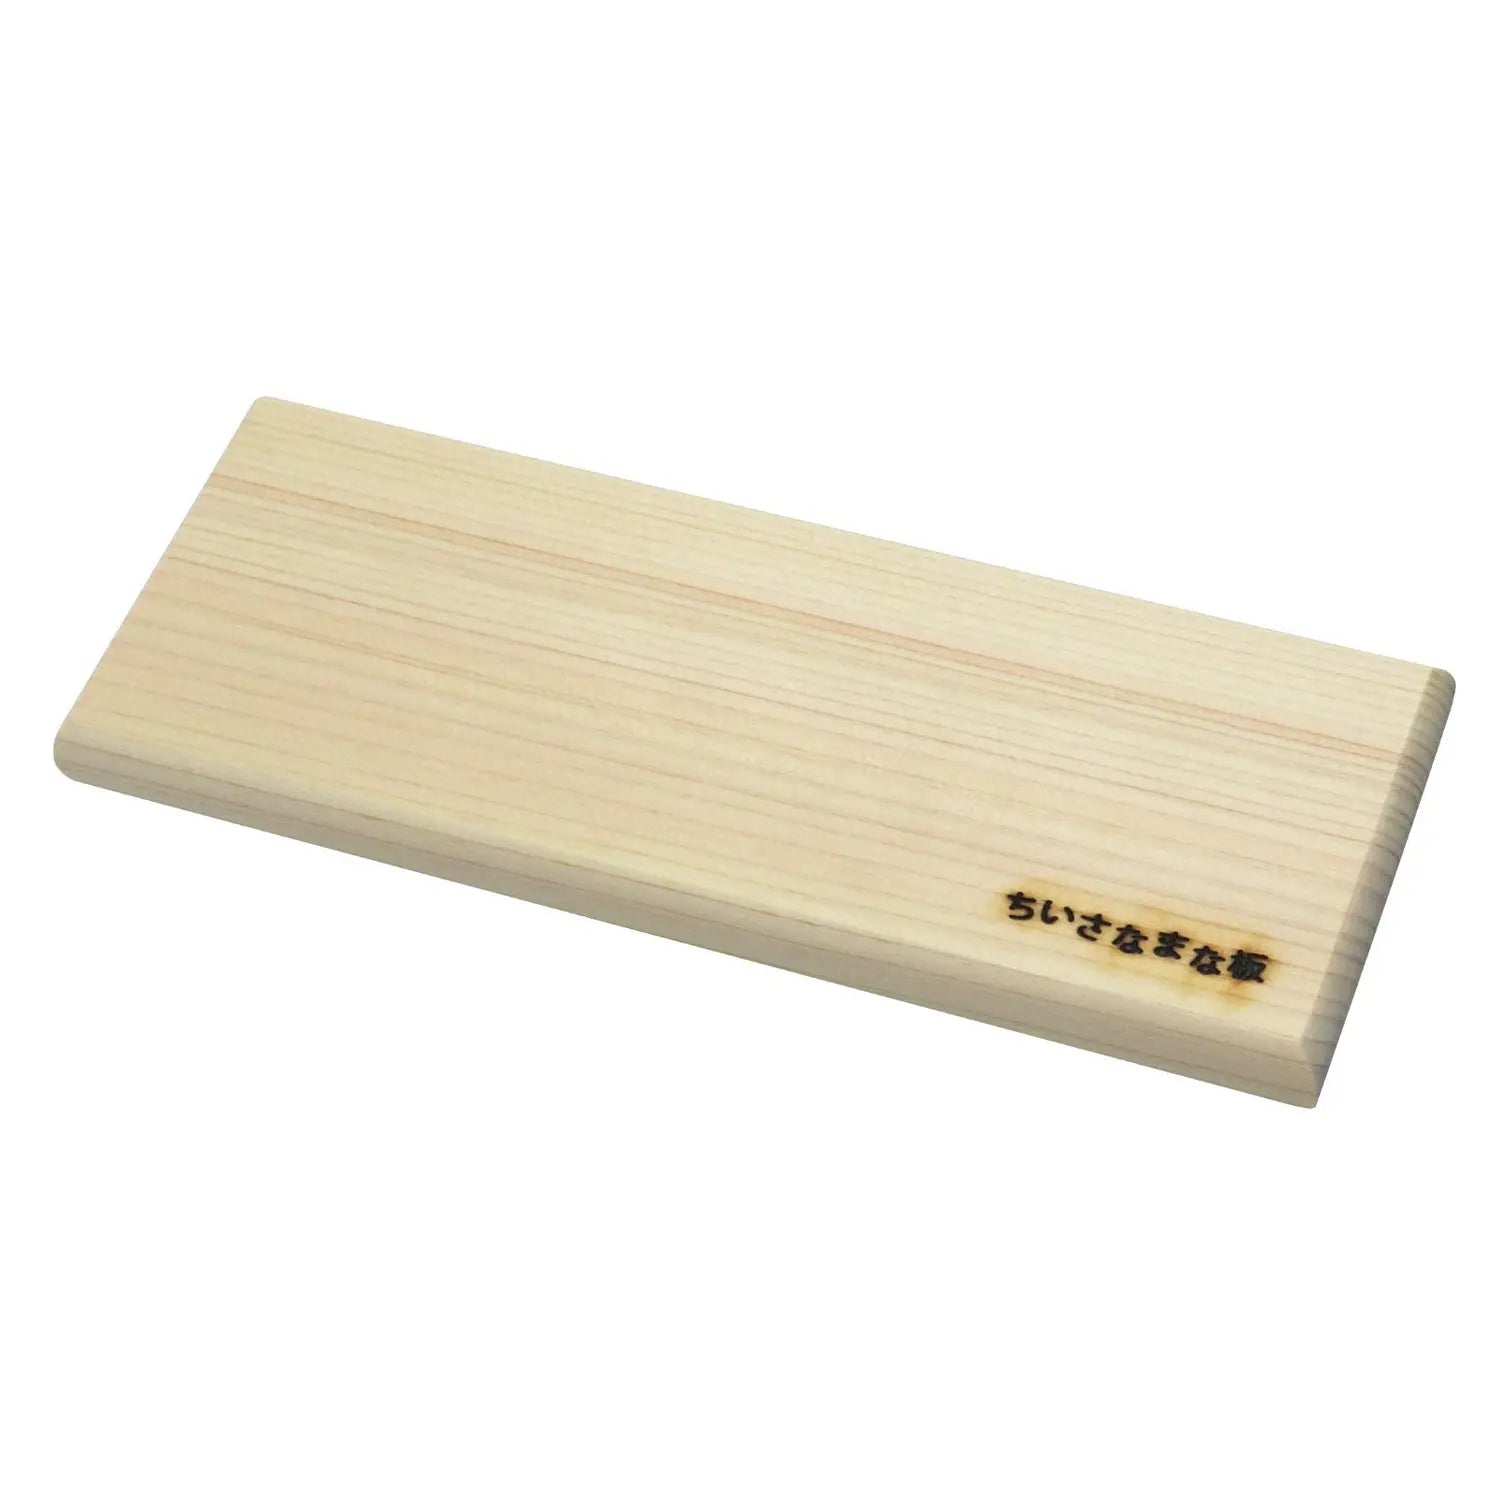 https://cdn.shopify.com/s/files/1/1610/3863/products/YamacohHinokiCypressWoodenMiniCuttingBoard84169_2_1600x.webp?v=1668989695